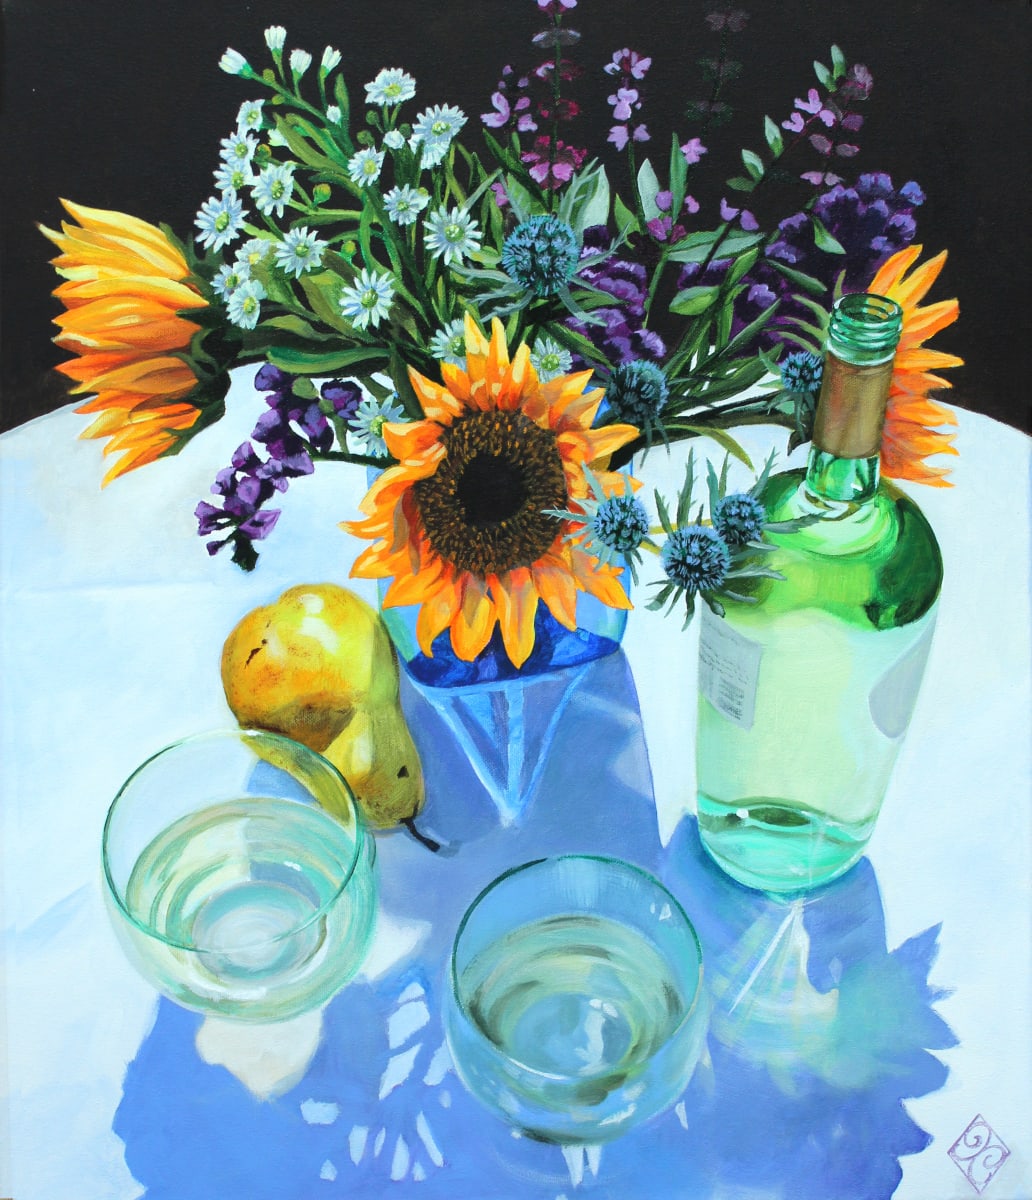 Summer Colors by Joan Chamberlain  Image: Sunflowers, white wine, and a pear in a sun-drenched table setting.